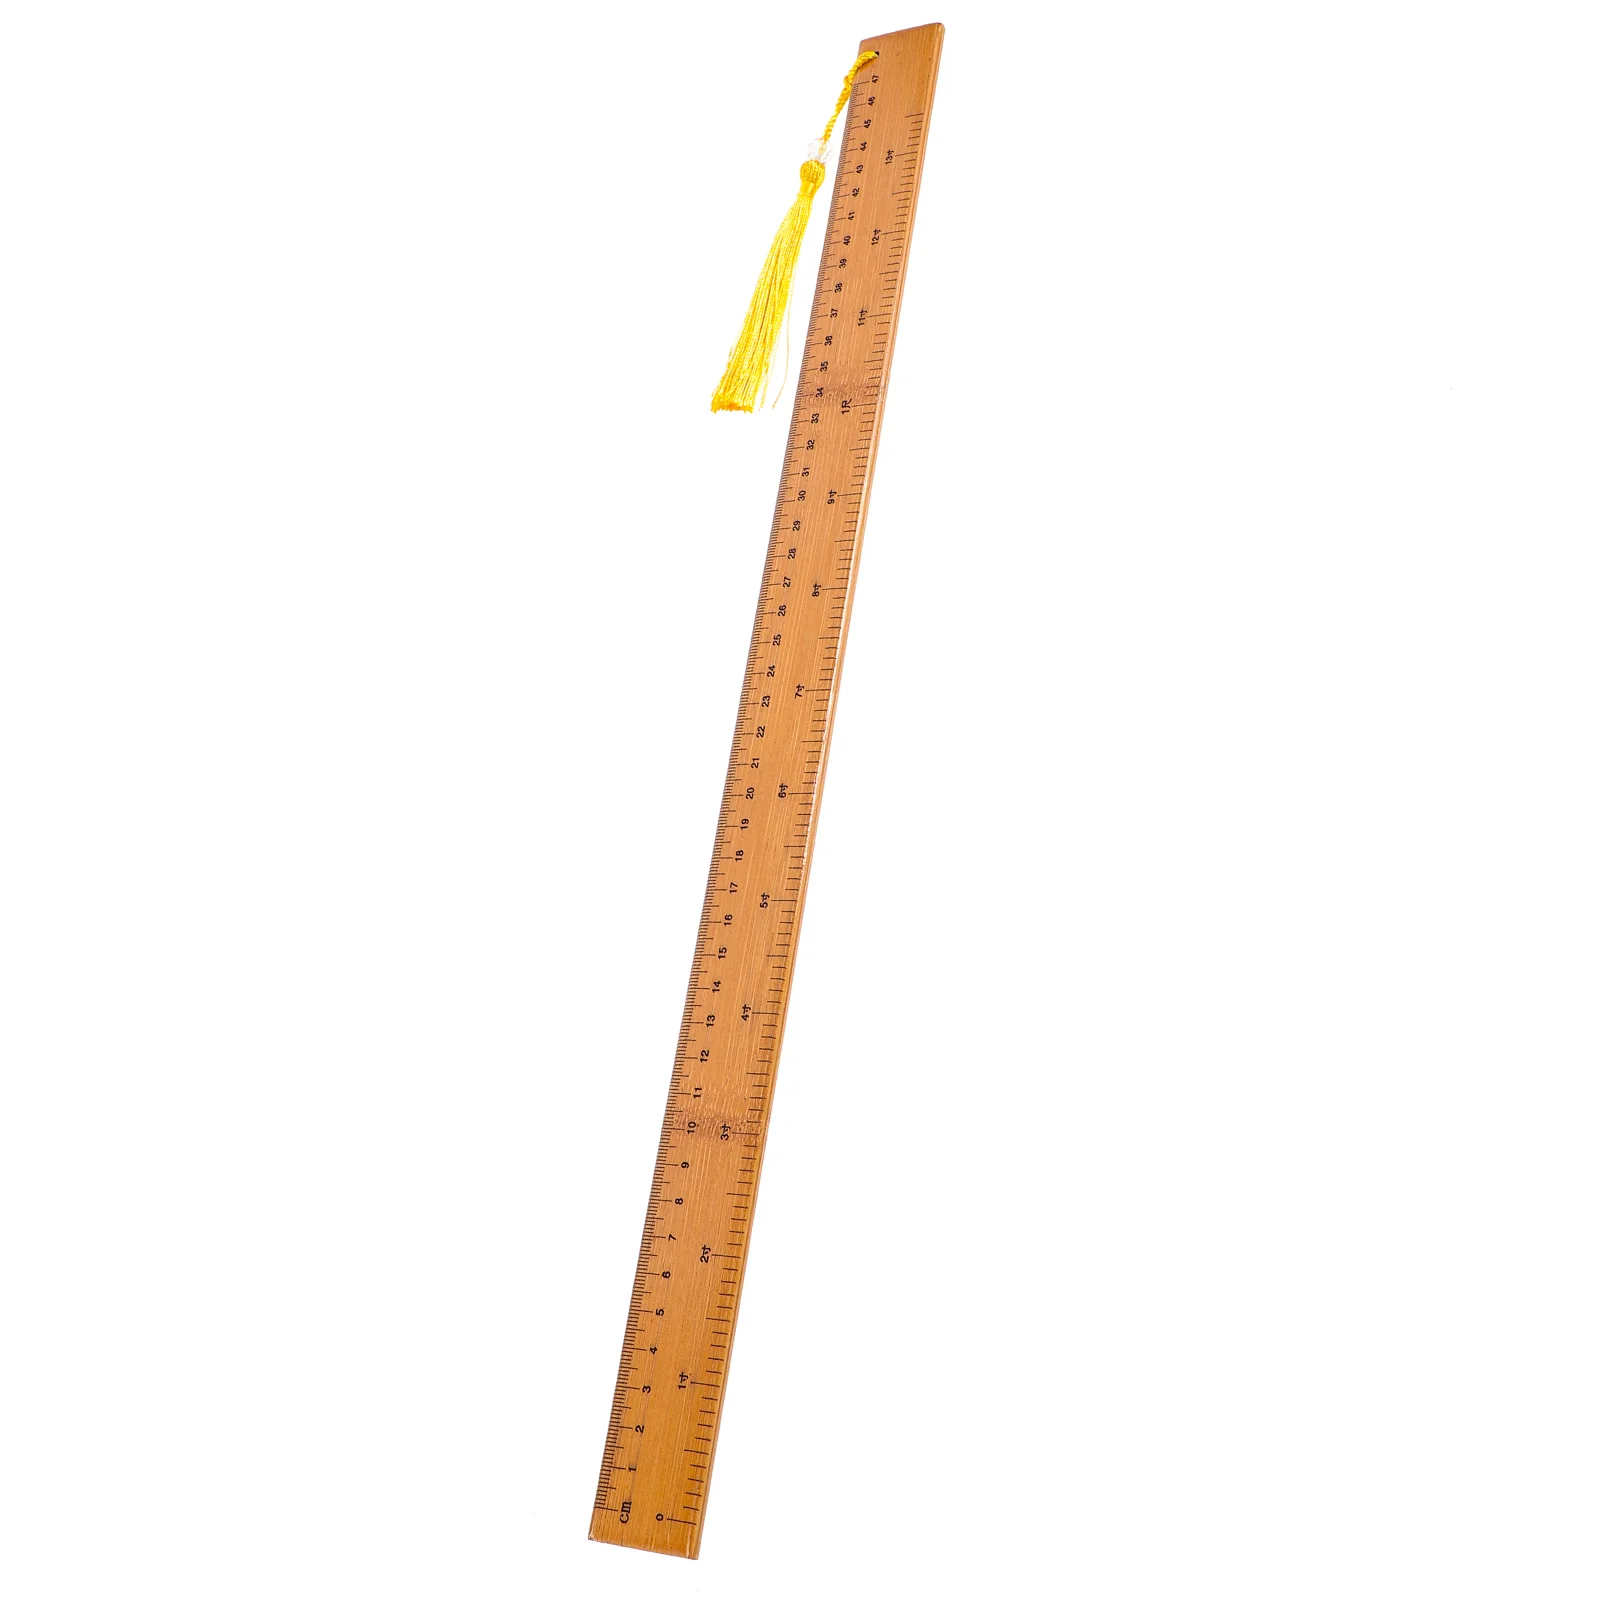 Household Straight Ruler Kids Ruler Measuring Bamboo Ruler Precise Student Ruler School Accessory Kids School Teaching Home high quality home hanging line level workshop tools 75x12 5mm bubble measuring level hanging levels horizontal